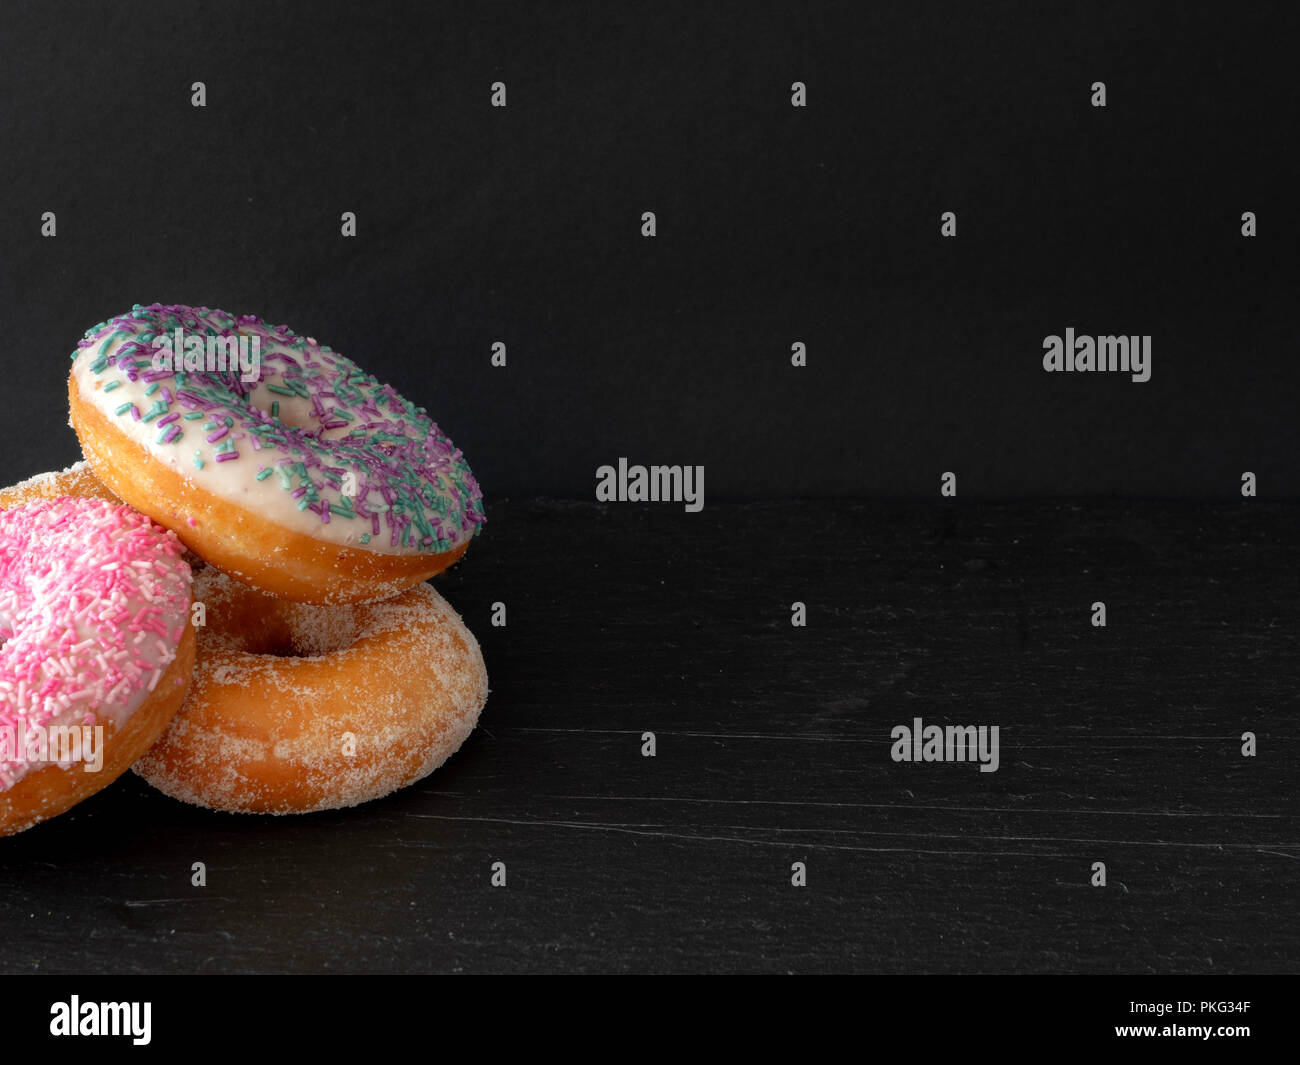 A pile of three ring donuts against a black background Stock Photo